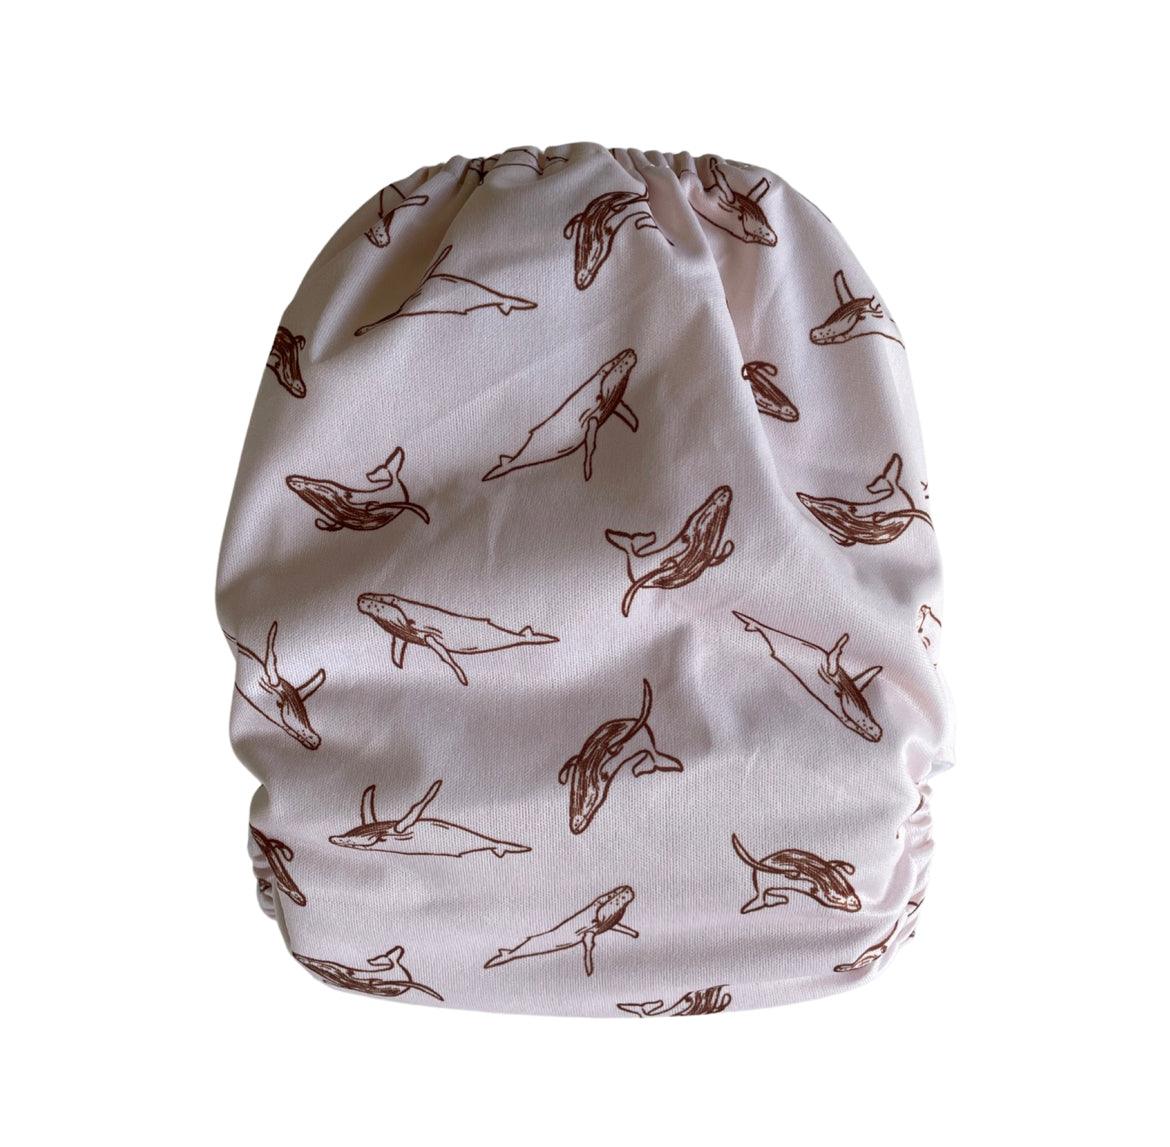 Yoho Baby & co. Reusable Classic Cotton Cloth Nappy NZ - Toffee Whales Print